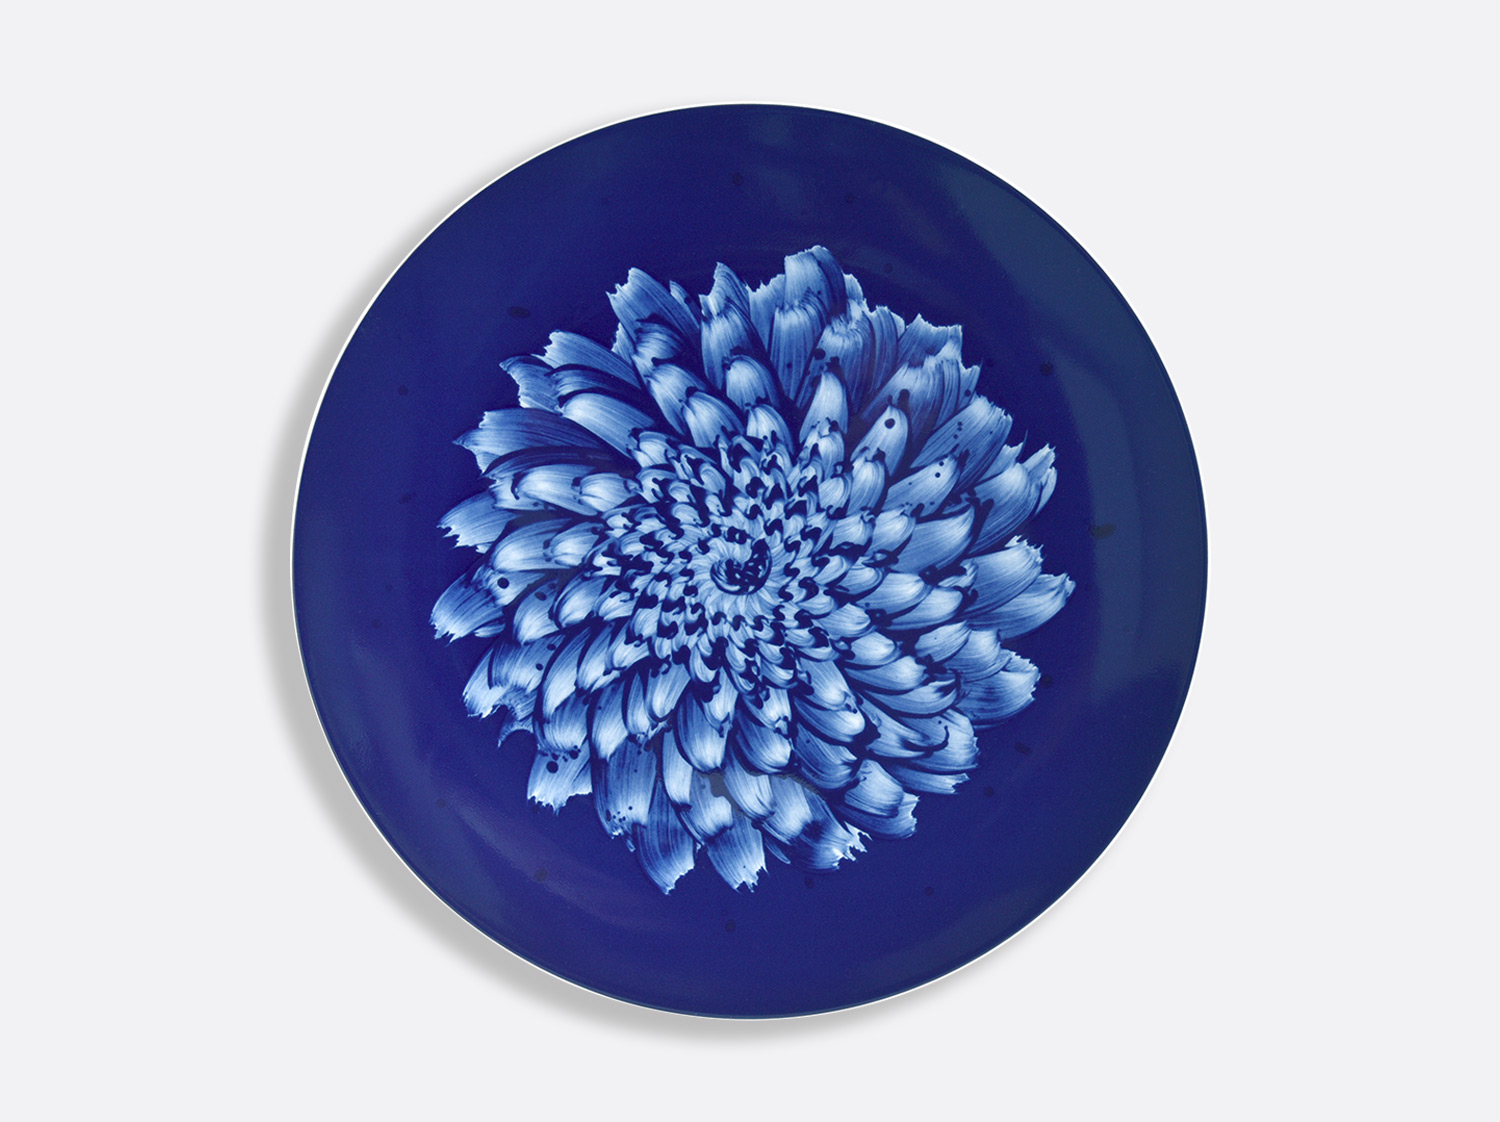 China Ultra flat service plate 31 cm of the collection IN BLOOM - Zemer Peled | Bernardaud